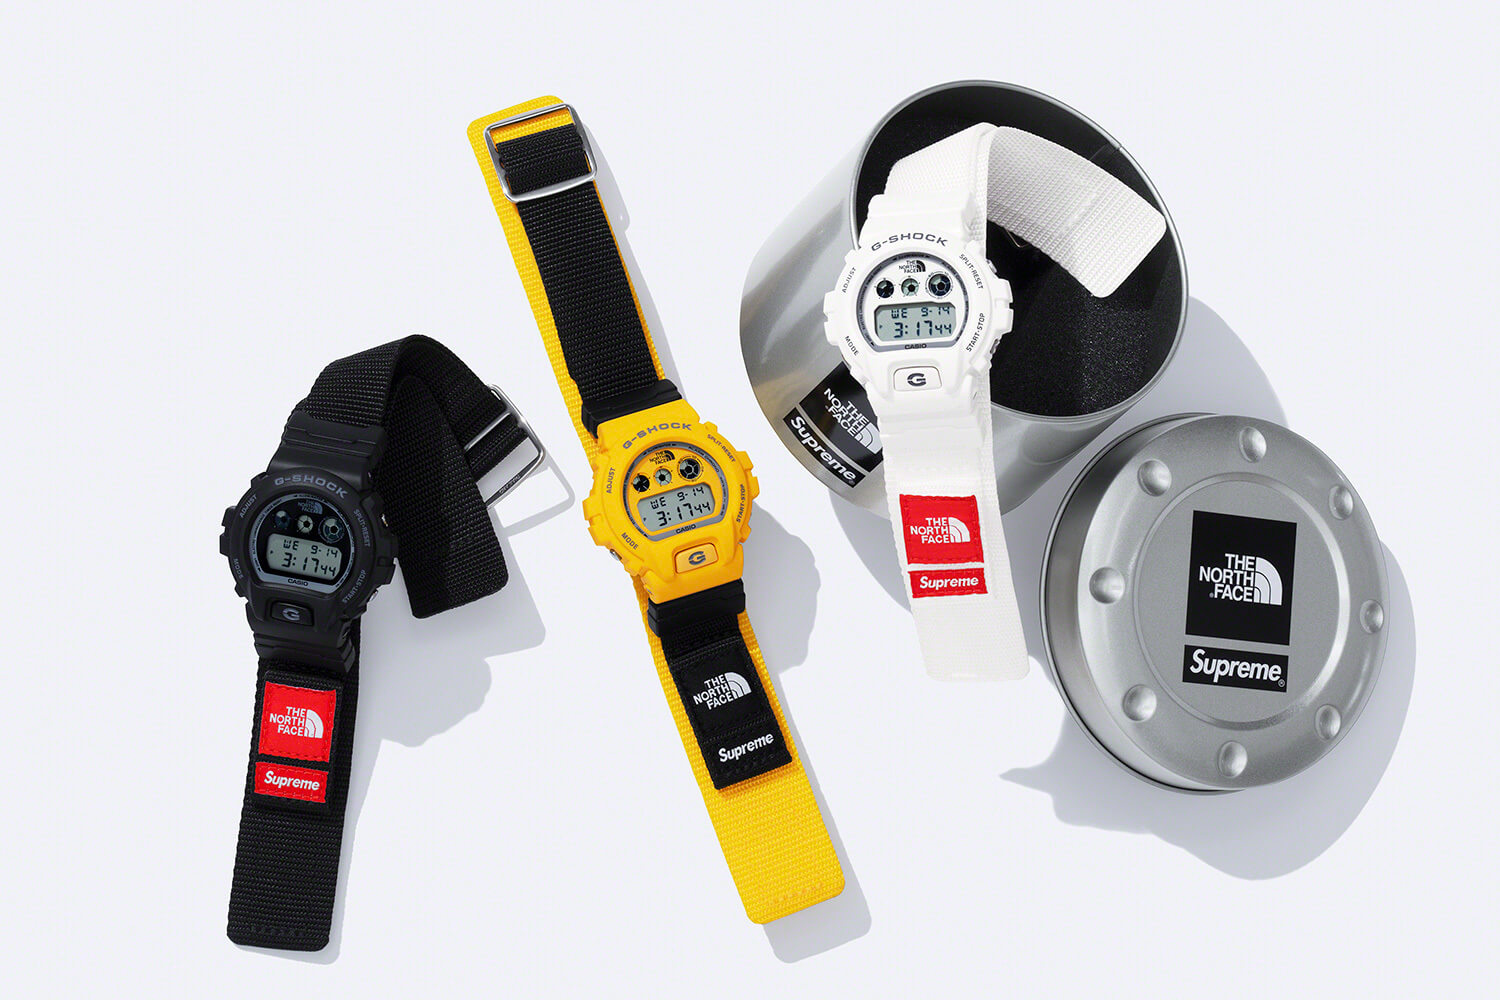 Supreme®/The North Face®/G-SHOCK Watch. - 腕時計(デジタル)